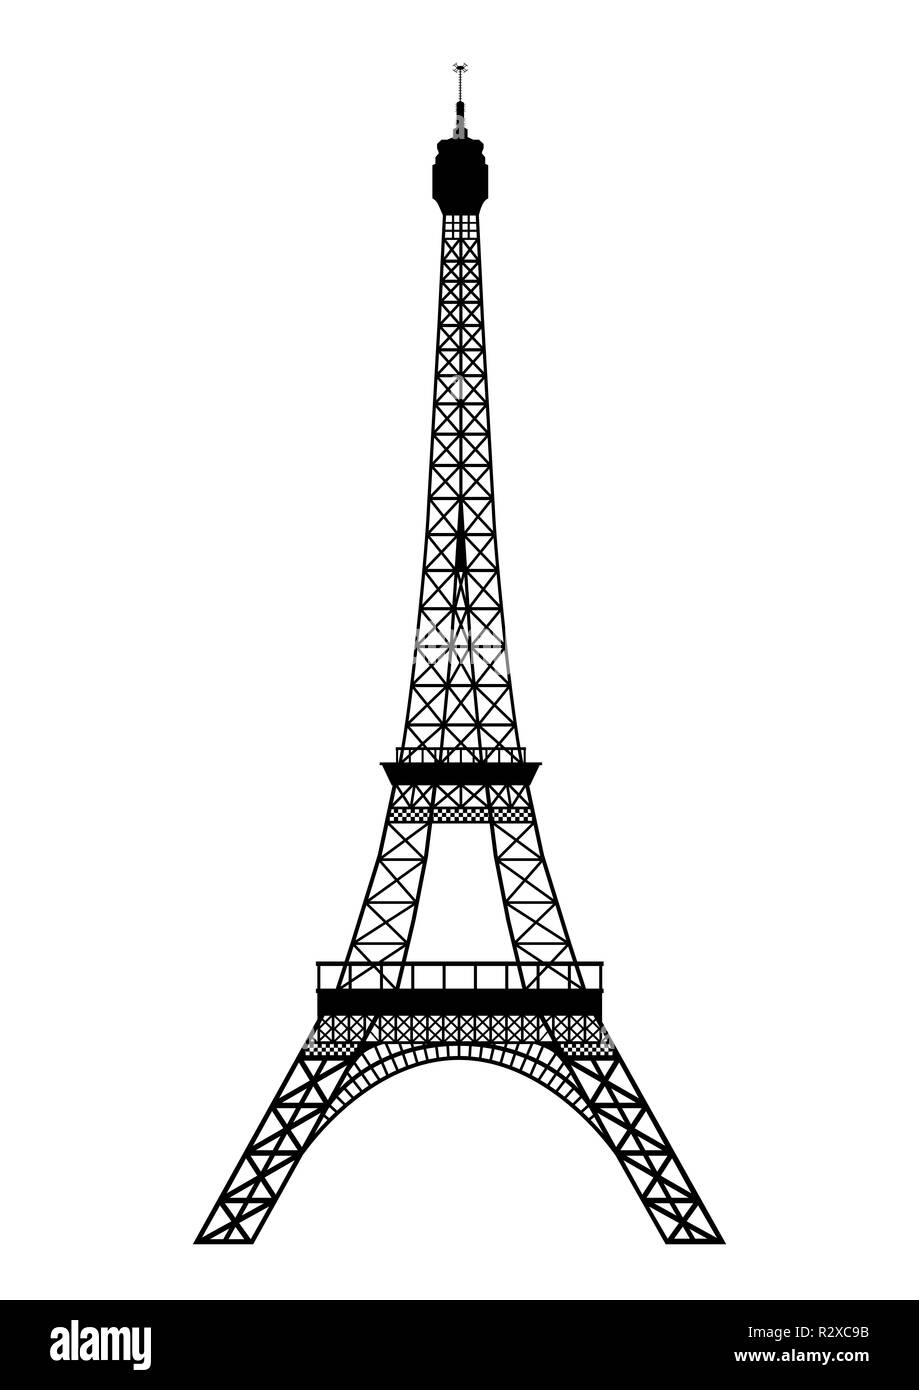 Eiffel tower vector Black and White Stock Photos & Images - Alamy